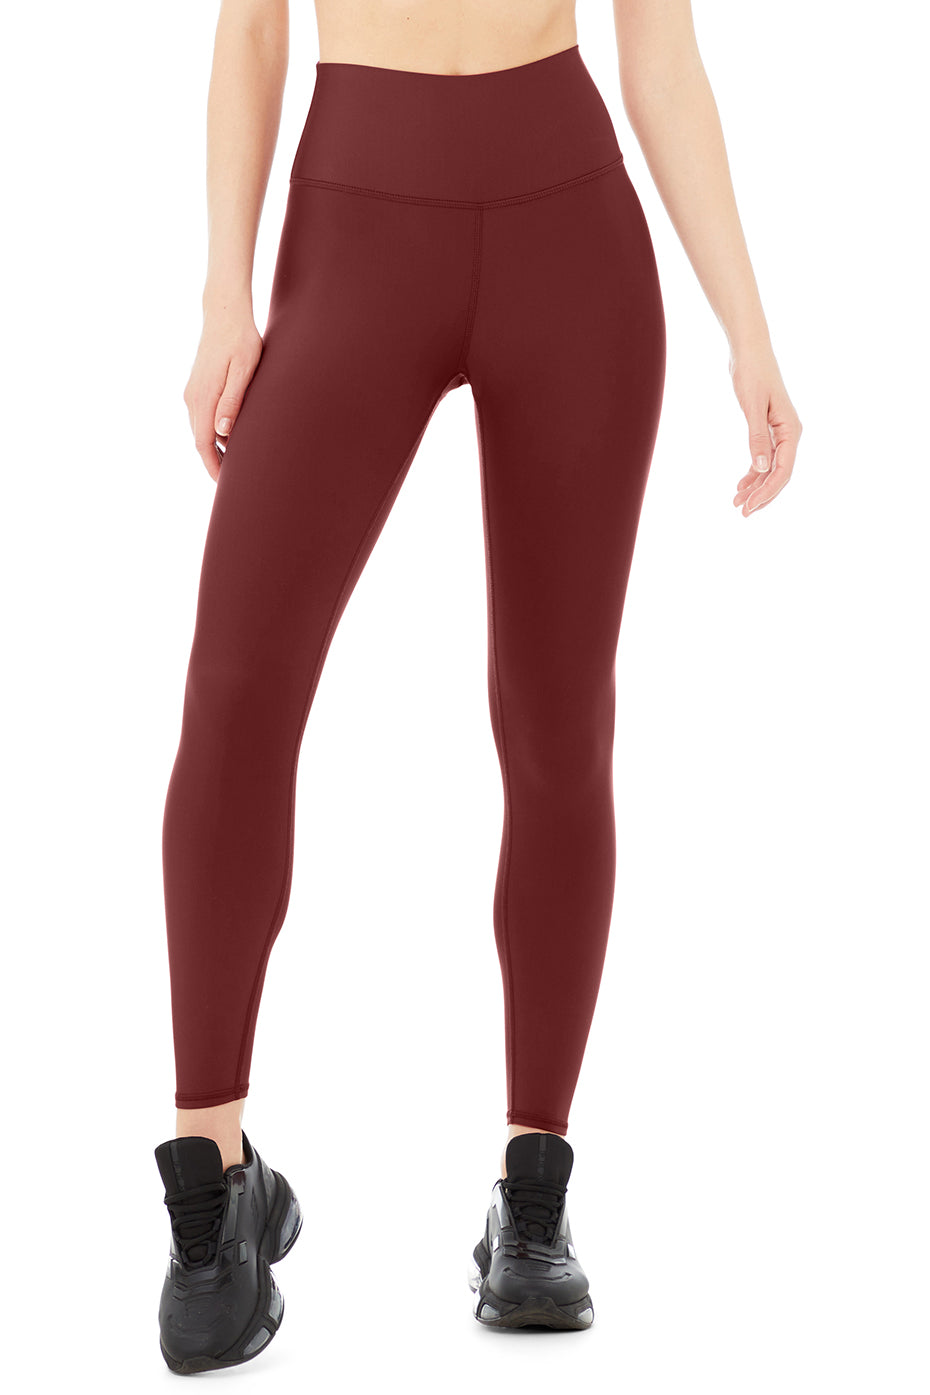 High-Waist Airlift Legging in Cranberry by Alo Yoga